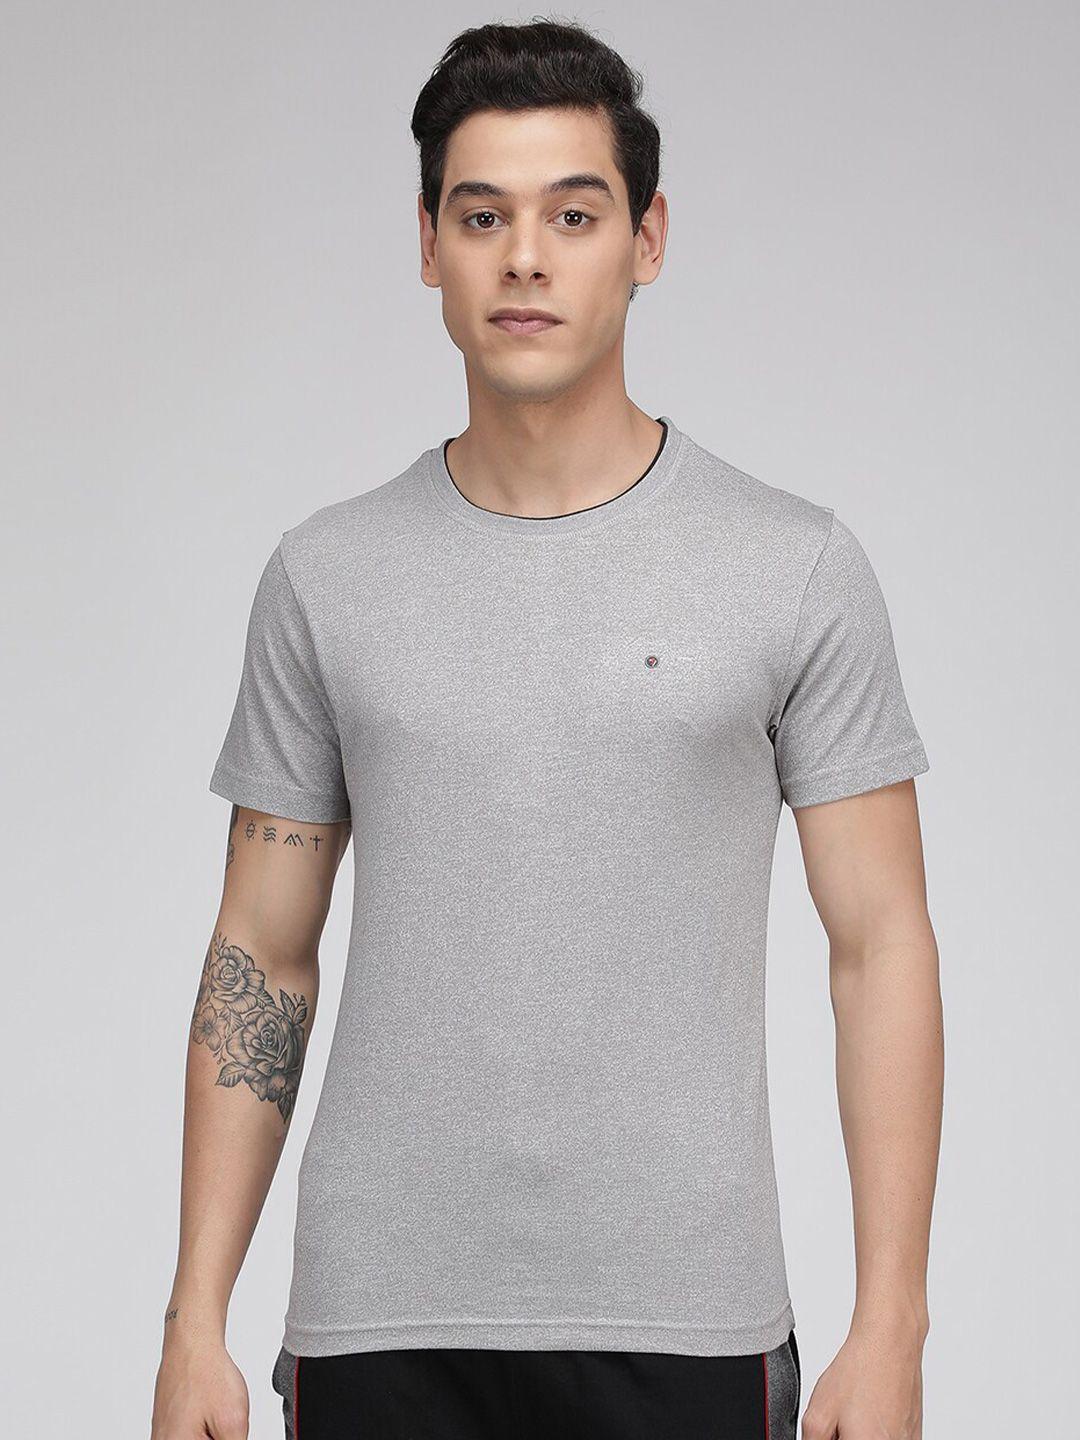 sporto-round-neck-short-sleeves-casual-t-shirt